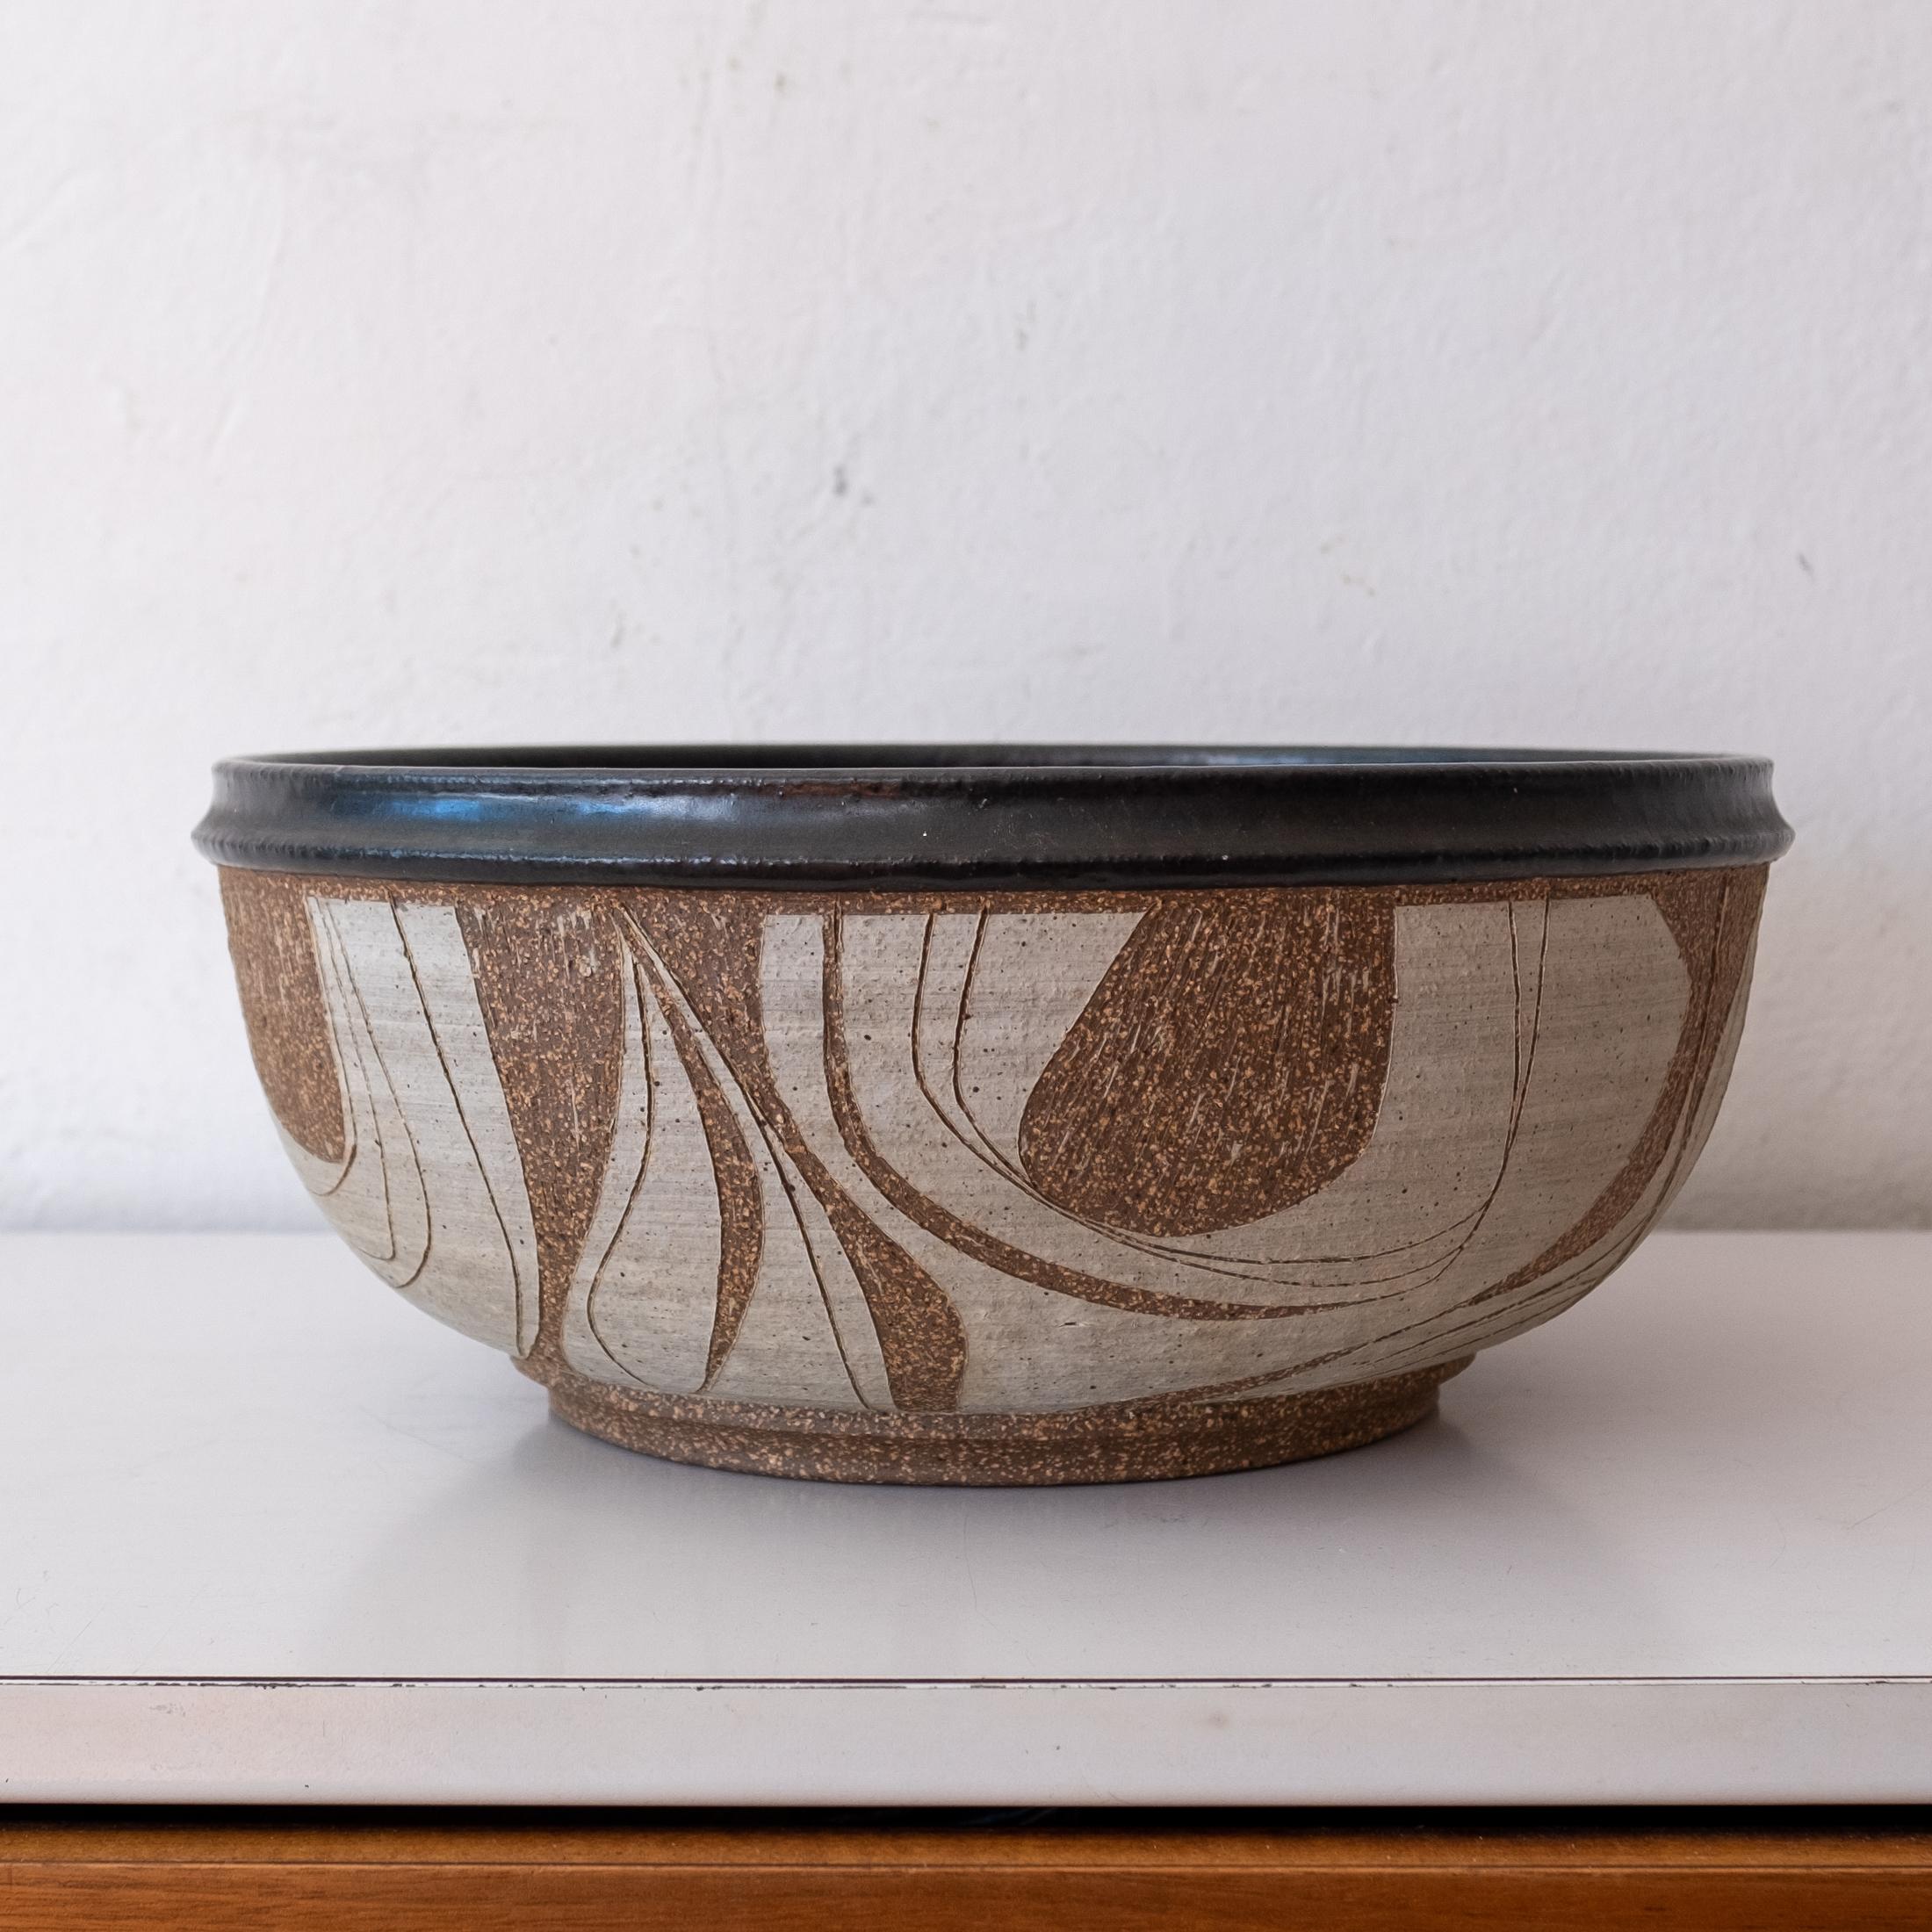 Incredible wheel-thrown large ceramic bowl by California artist, Joel Edwards. Incised abstract pattern around the circumference of the bowl. Glazed interior and bottom. Signed on the bottom. USA, 1960s 

Edwards was based in Los Angeles, CA. He